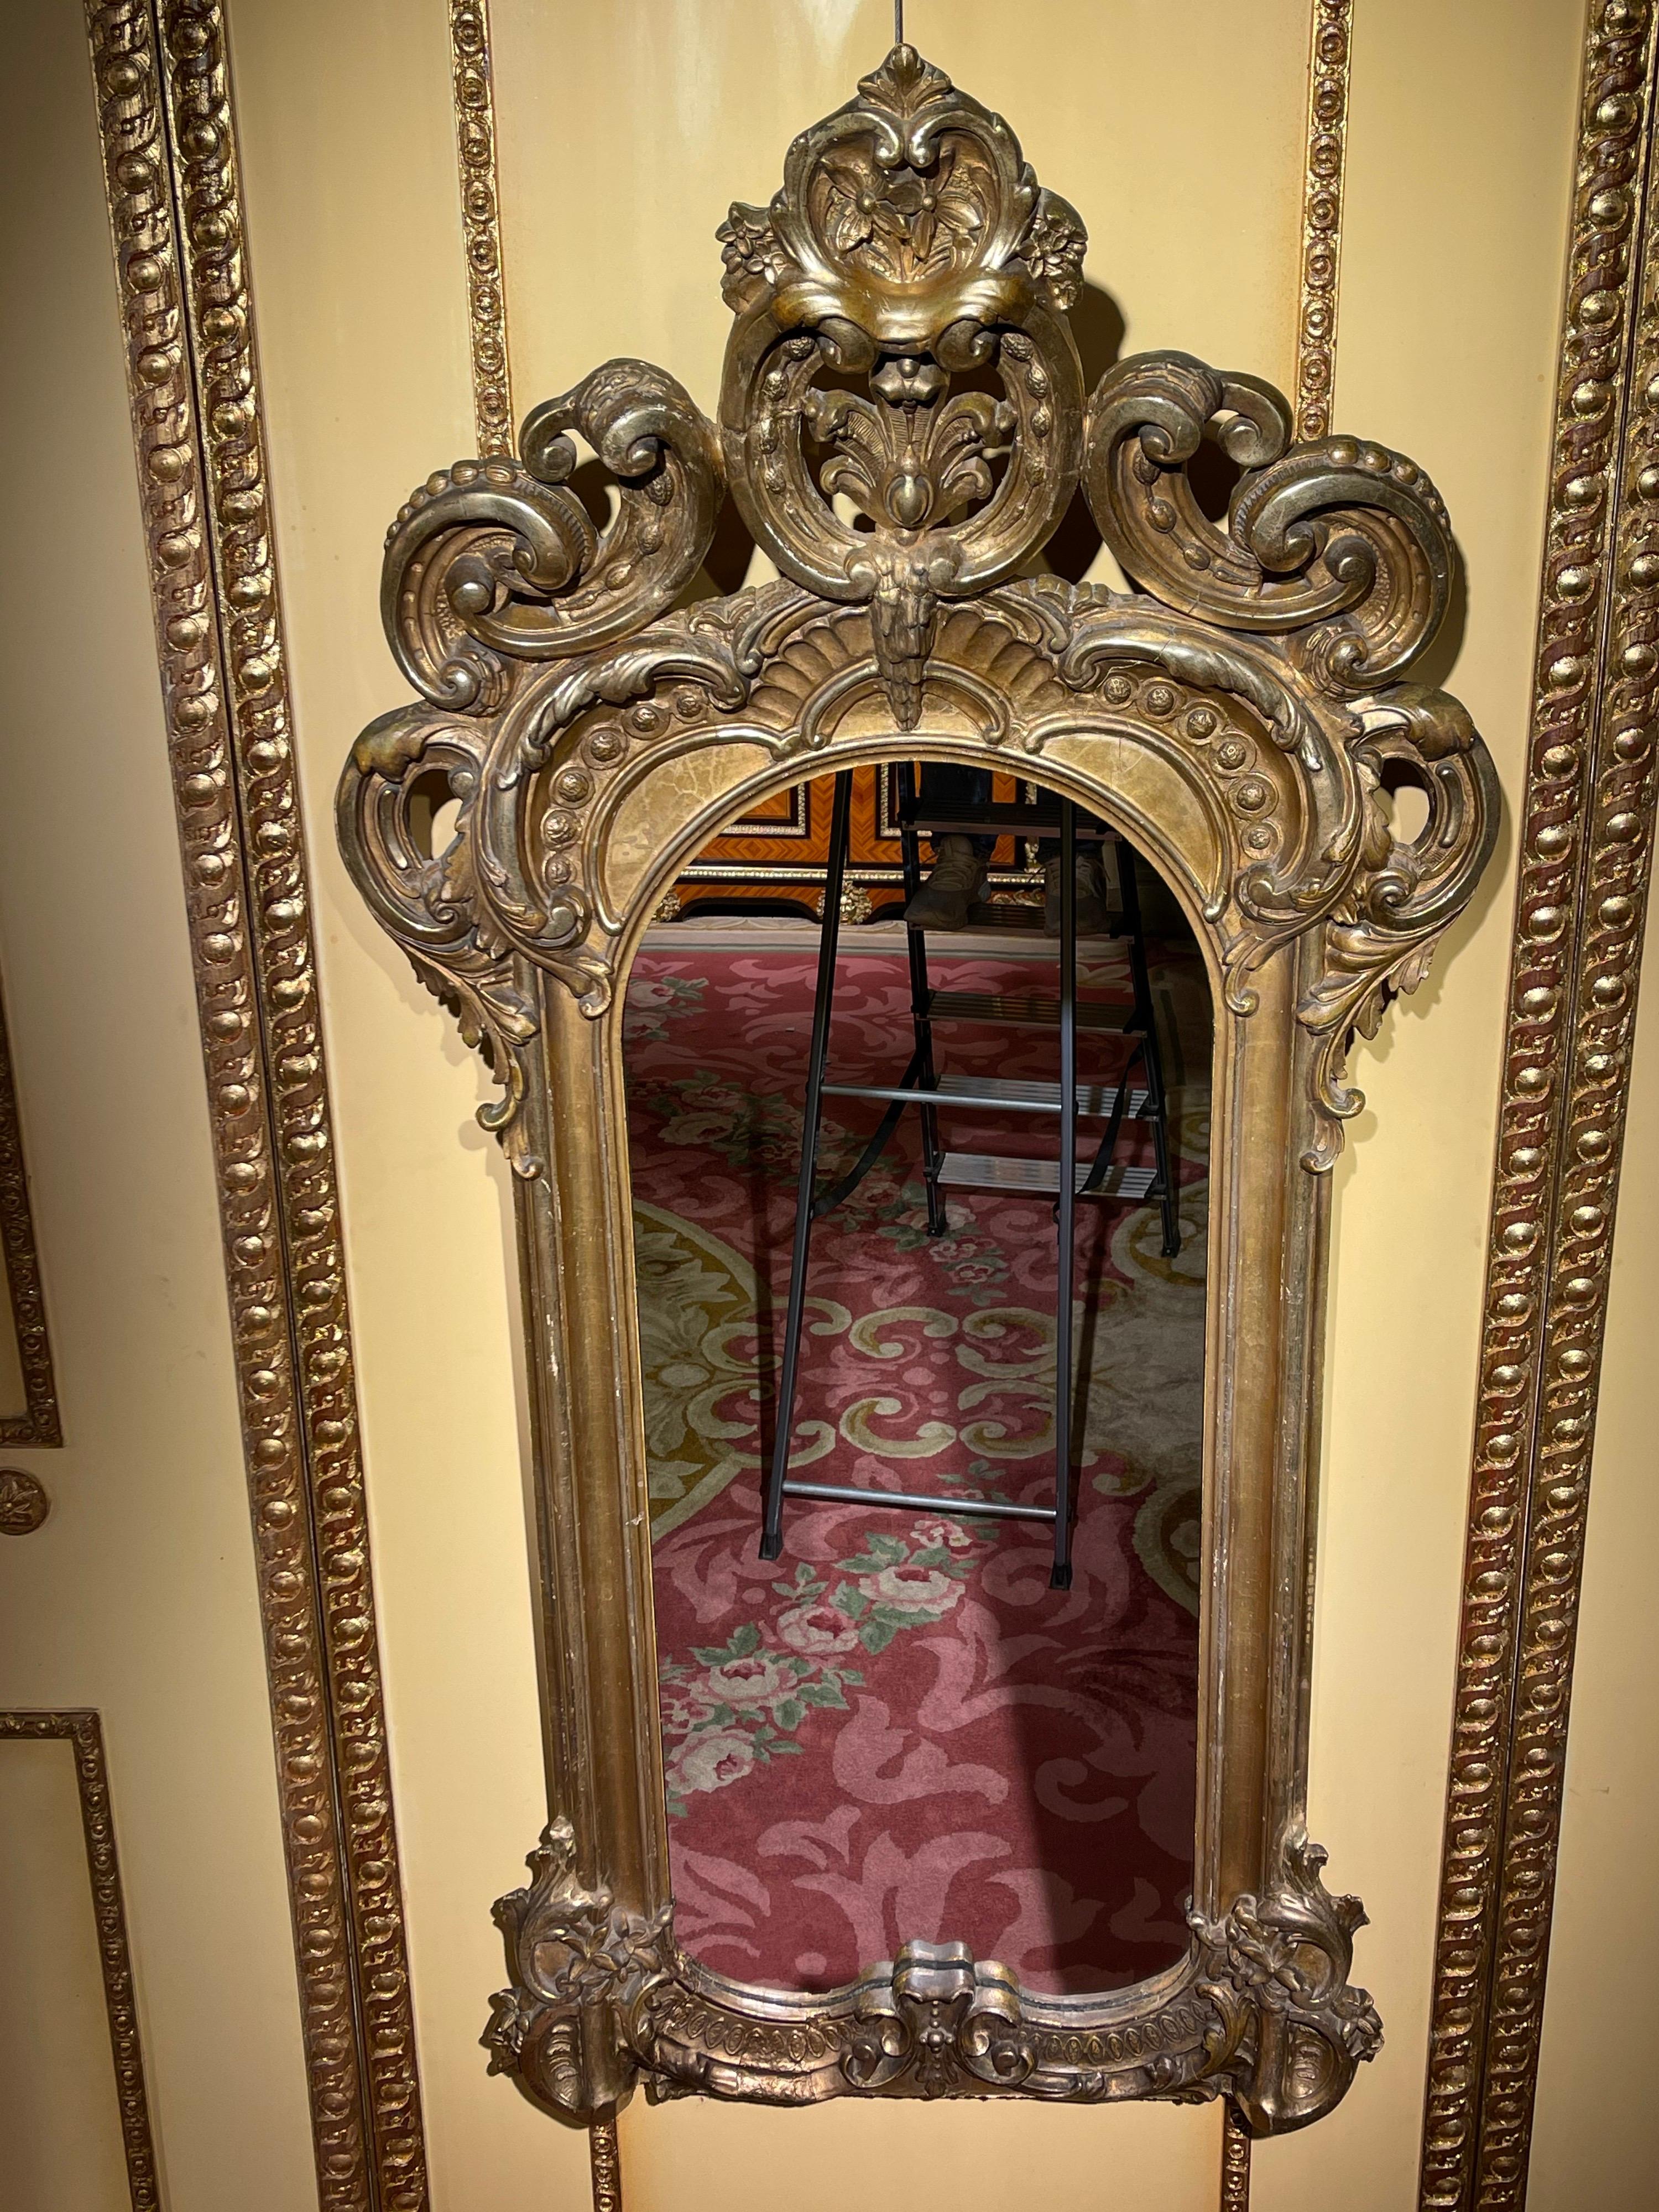 Stately gilded parlor wall mirror, Napoleon III

Magnificent and richly ornate wall mirror. with a high and pronounced crown. Extremely finely crafted and gold-plated.

France around 1880.

Highly rectangular, rounded mirror frame. An impressive